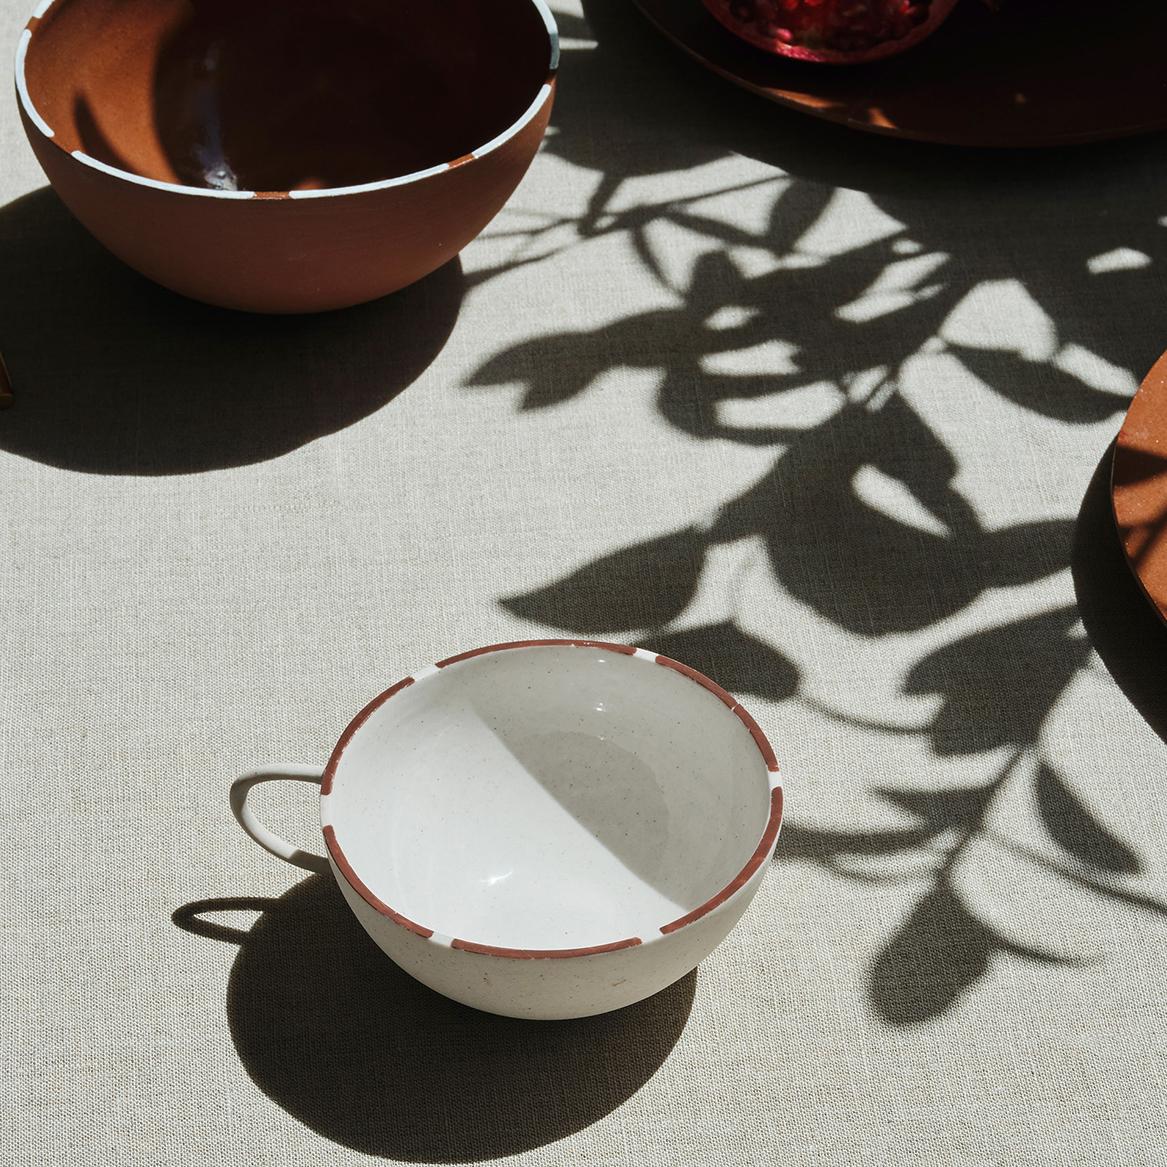 The pieces are slip cast in London, made from stoneware in small batches. The hand painted details around the rim of each item in the collection is created by glaze in a complimentary colour to the body of each piece.

CUSTHOM studio has developed